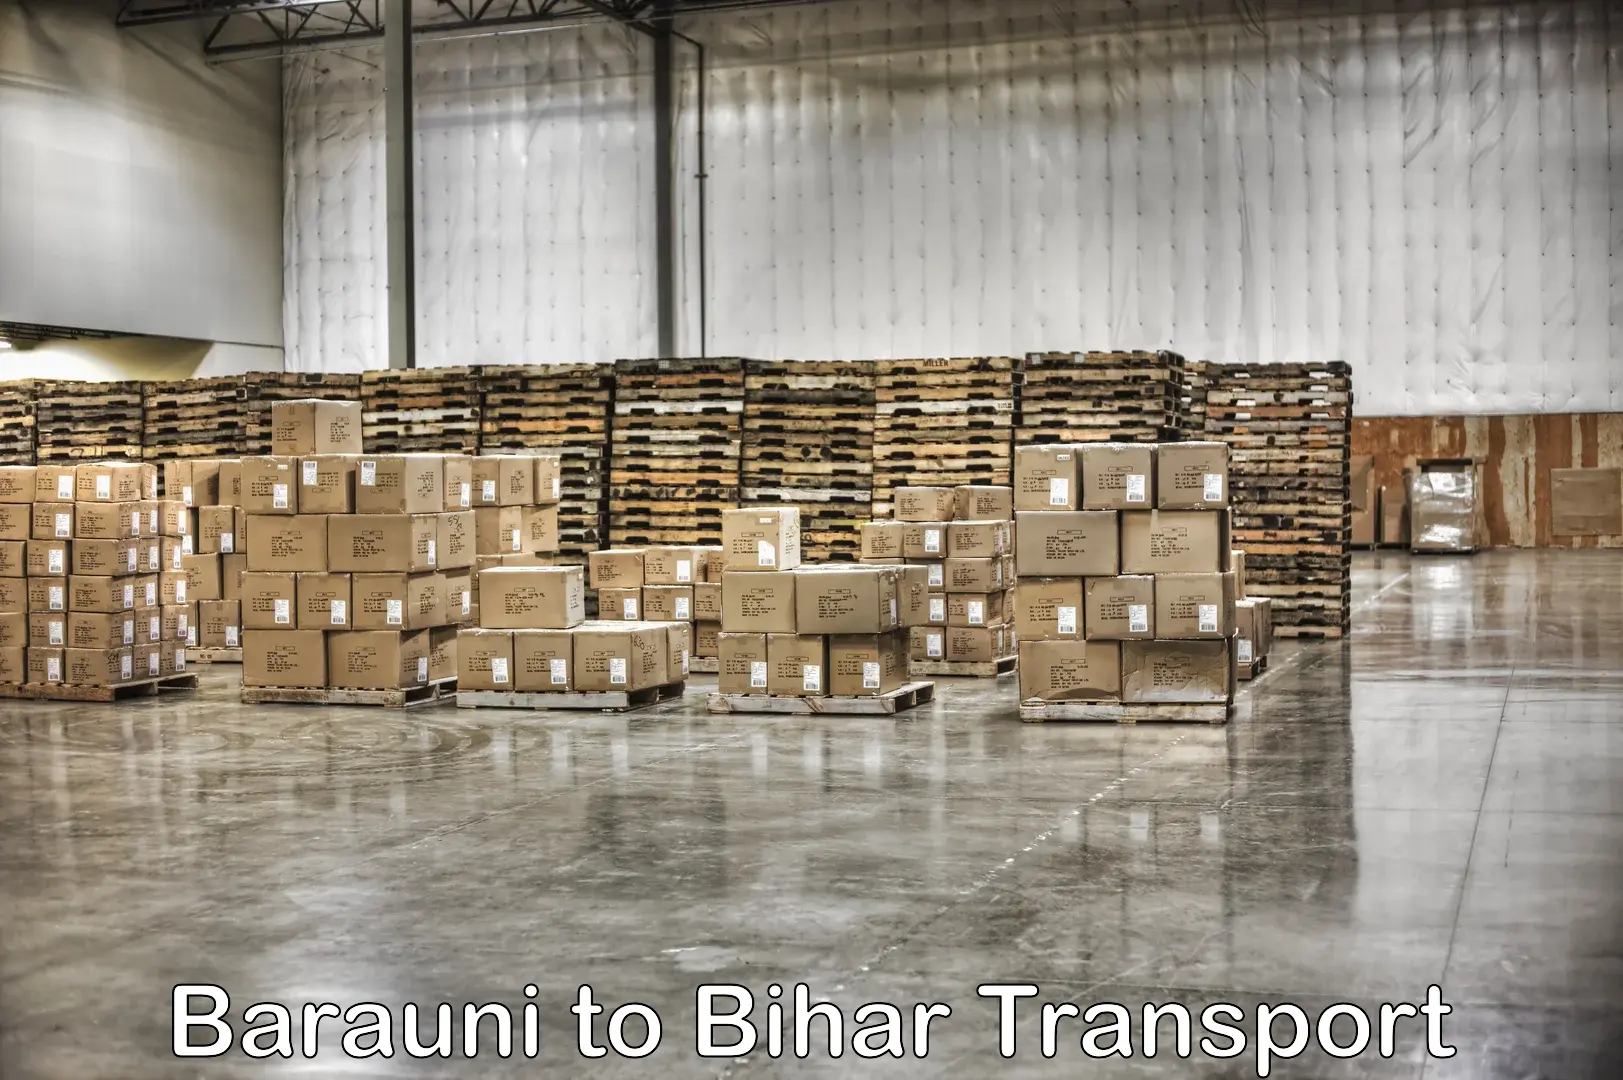 Part load transport service in India Barauni to Bihar